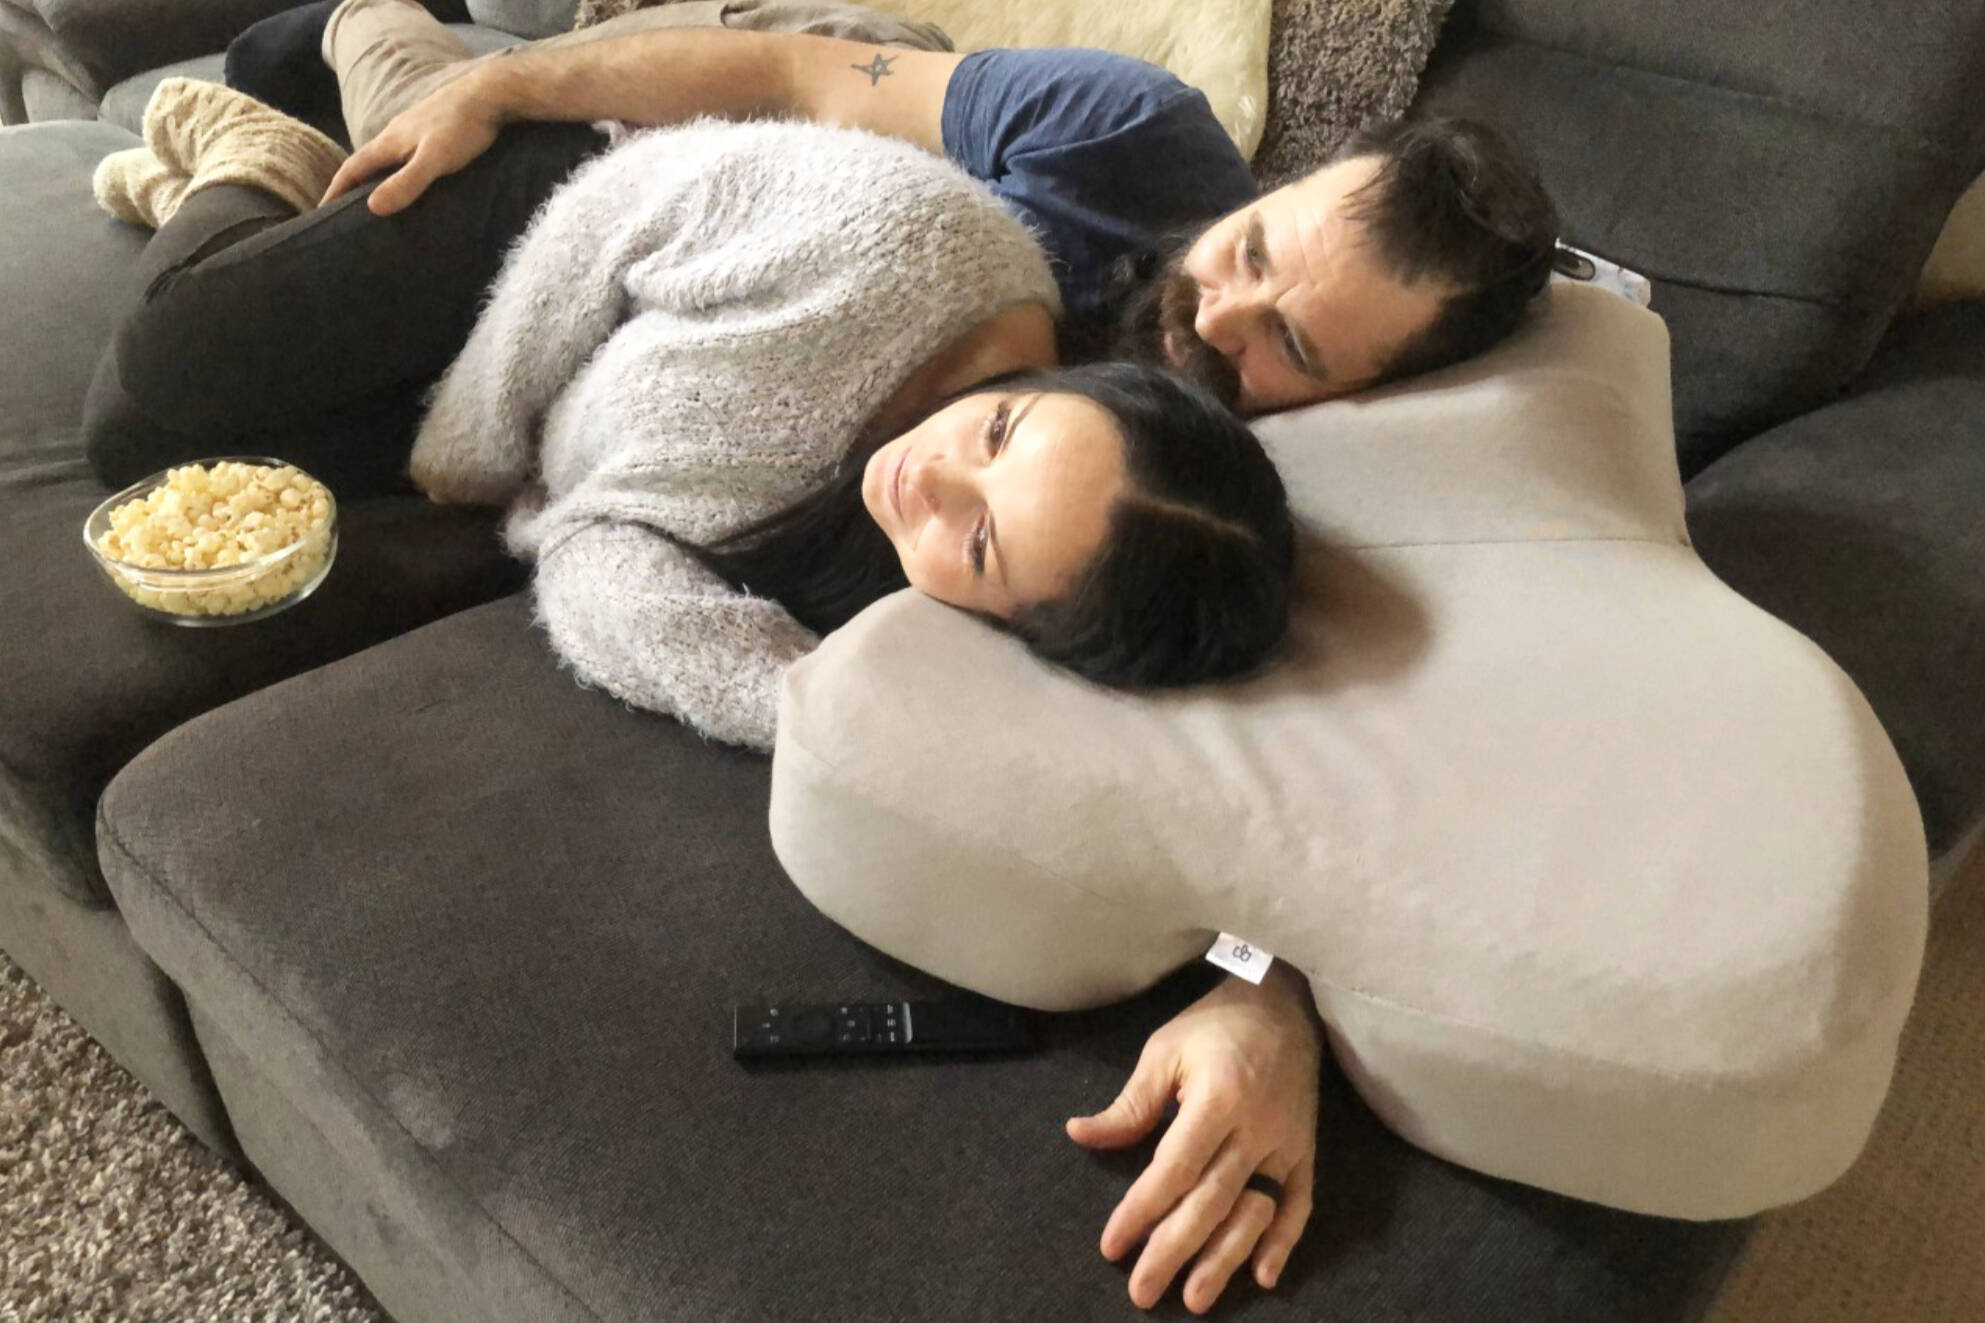 Brodie Wilkinson is the inventor of the Big Spoon Pillow, which helps users spend comfortable cuddle time together. (Contributed)